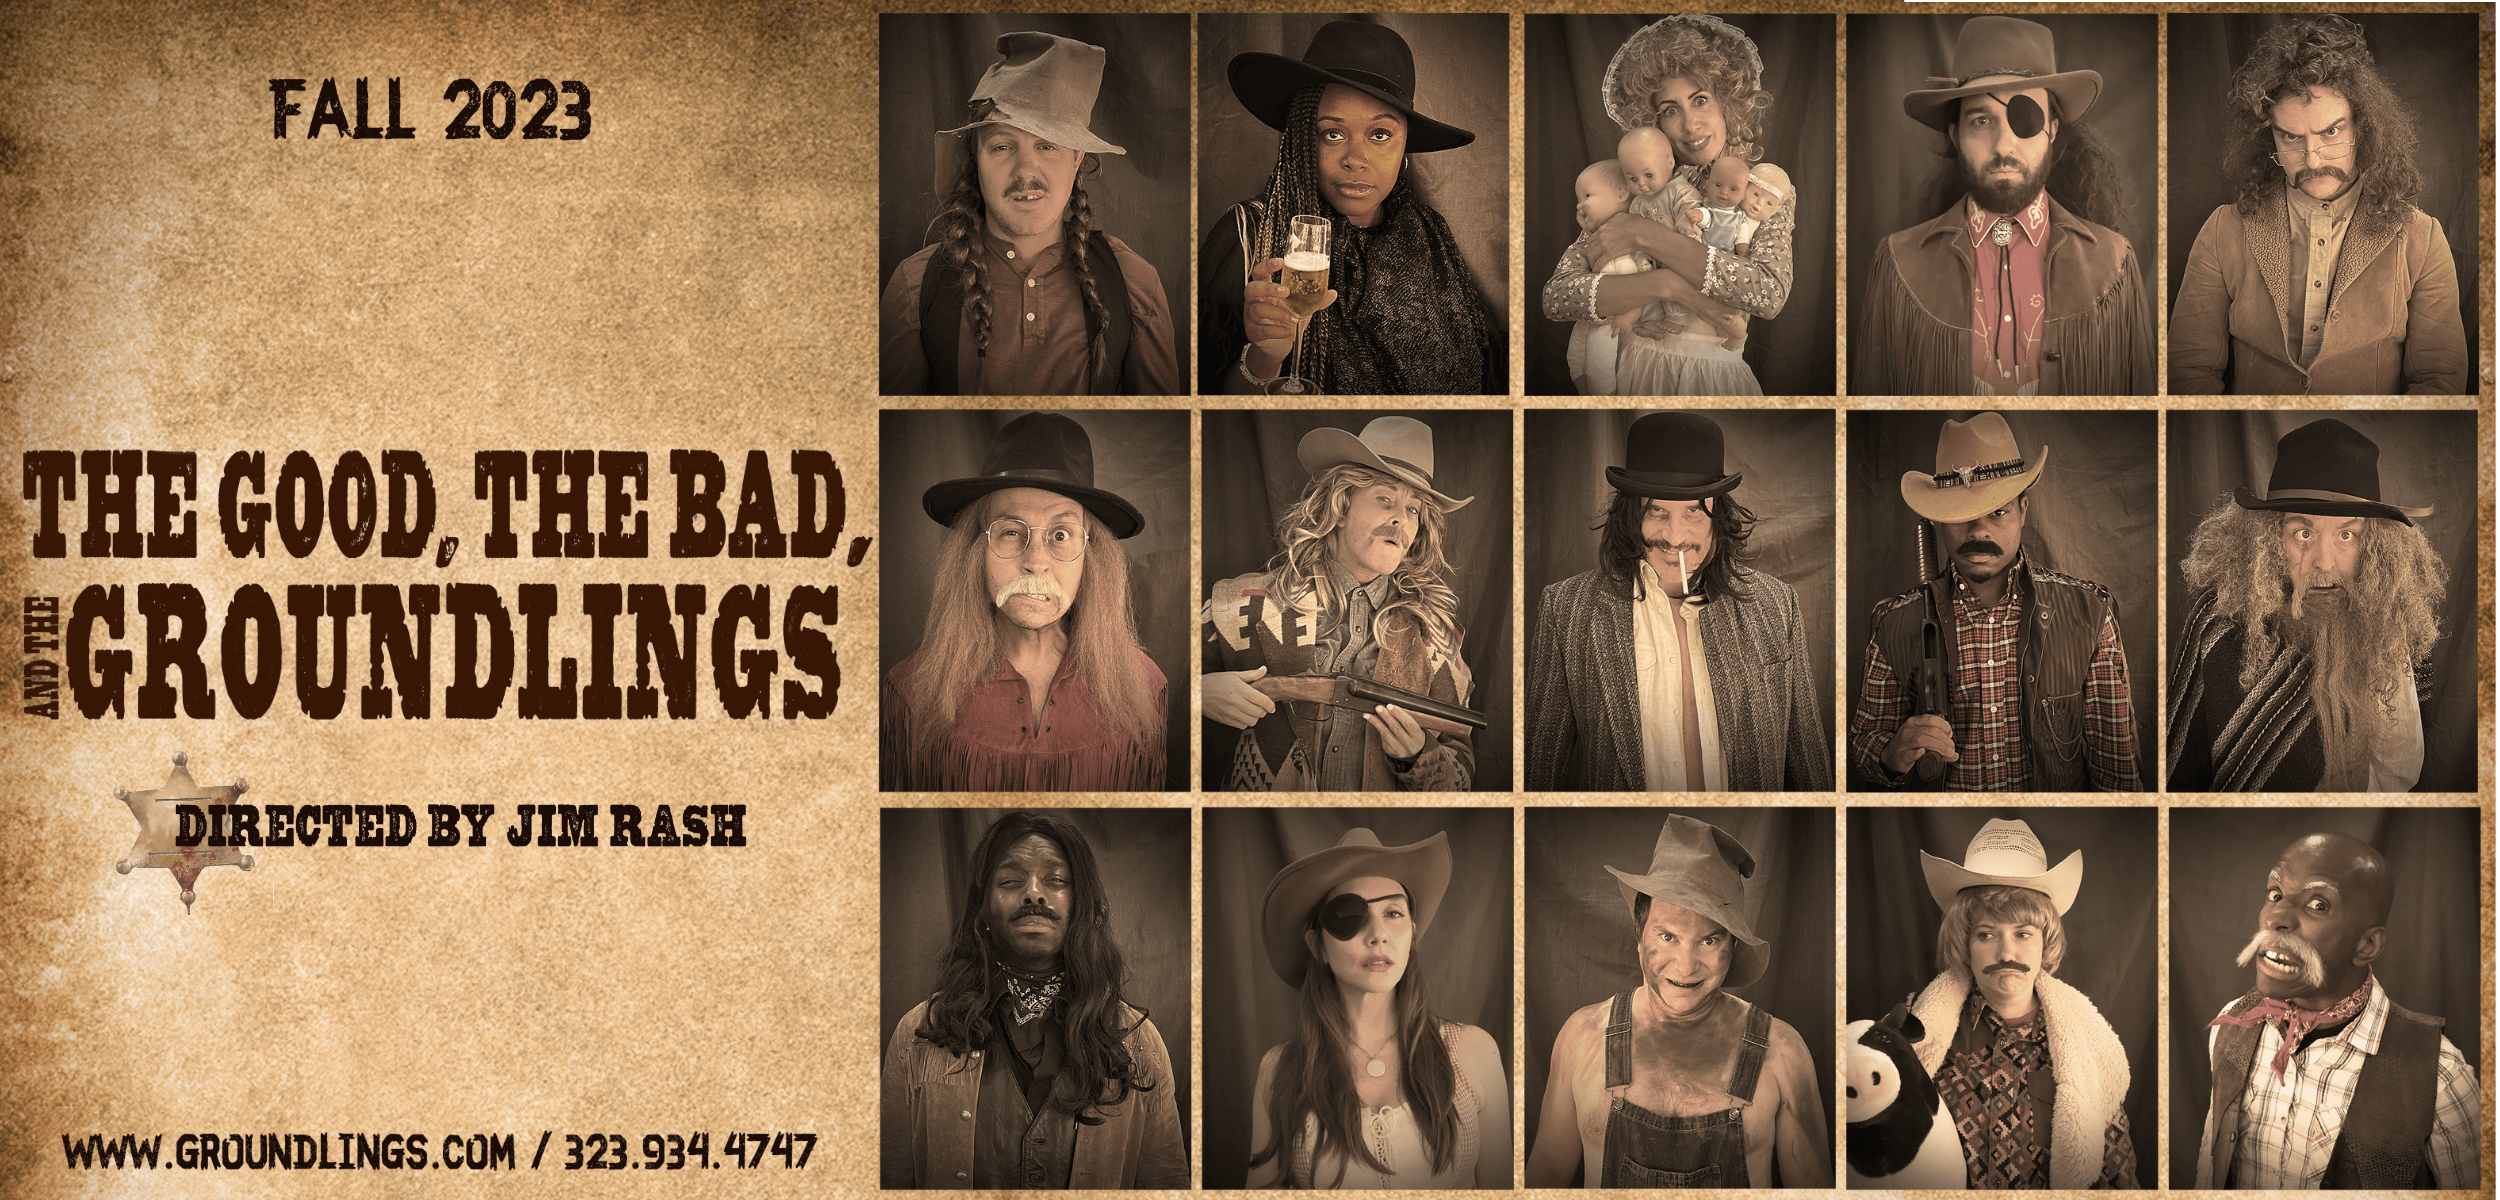 https://groundlings.com/shows/the-good-the-bad-the-groundlings